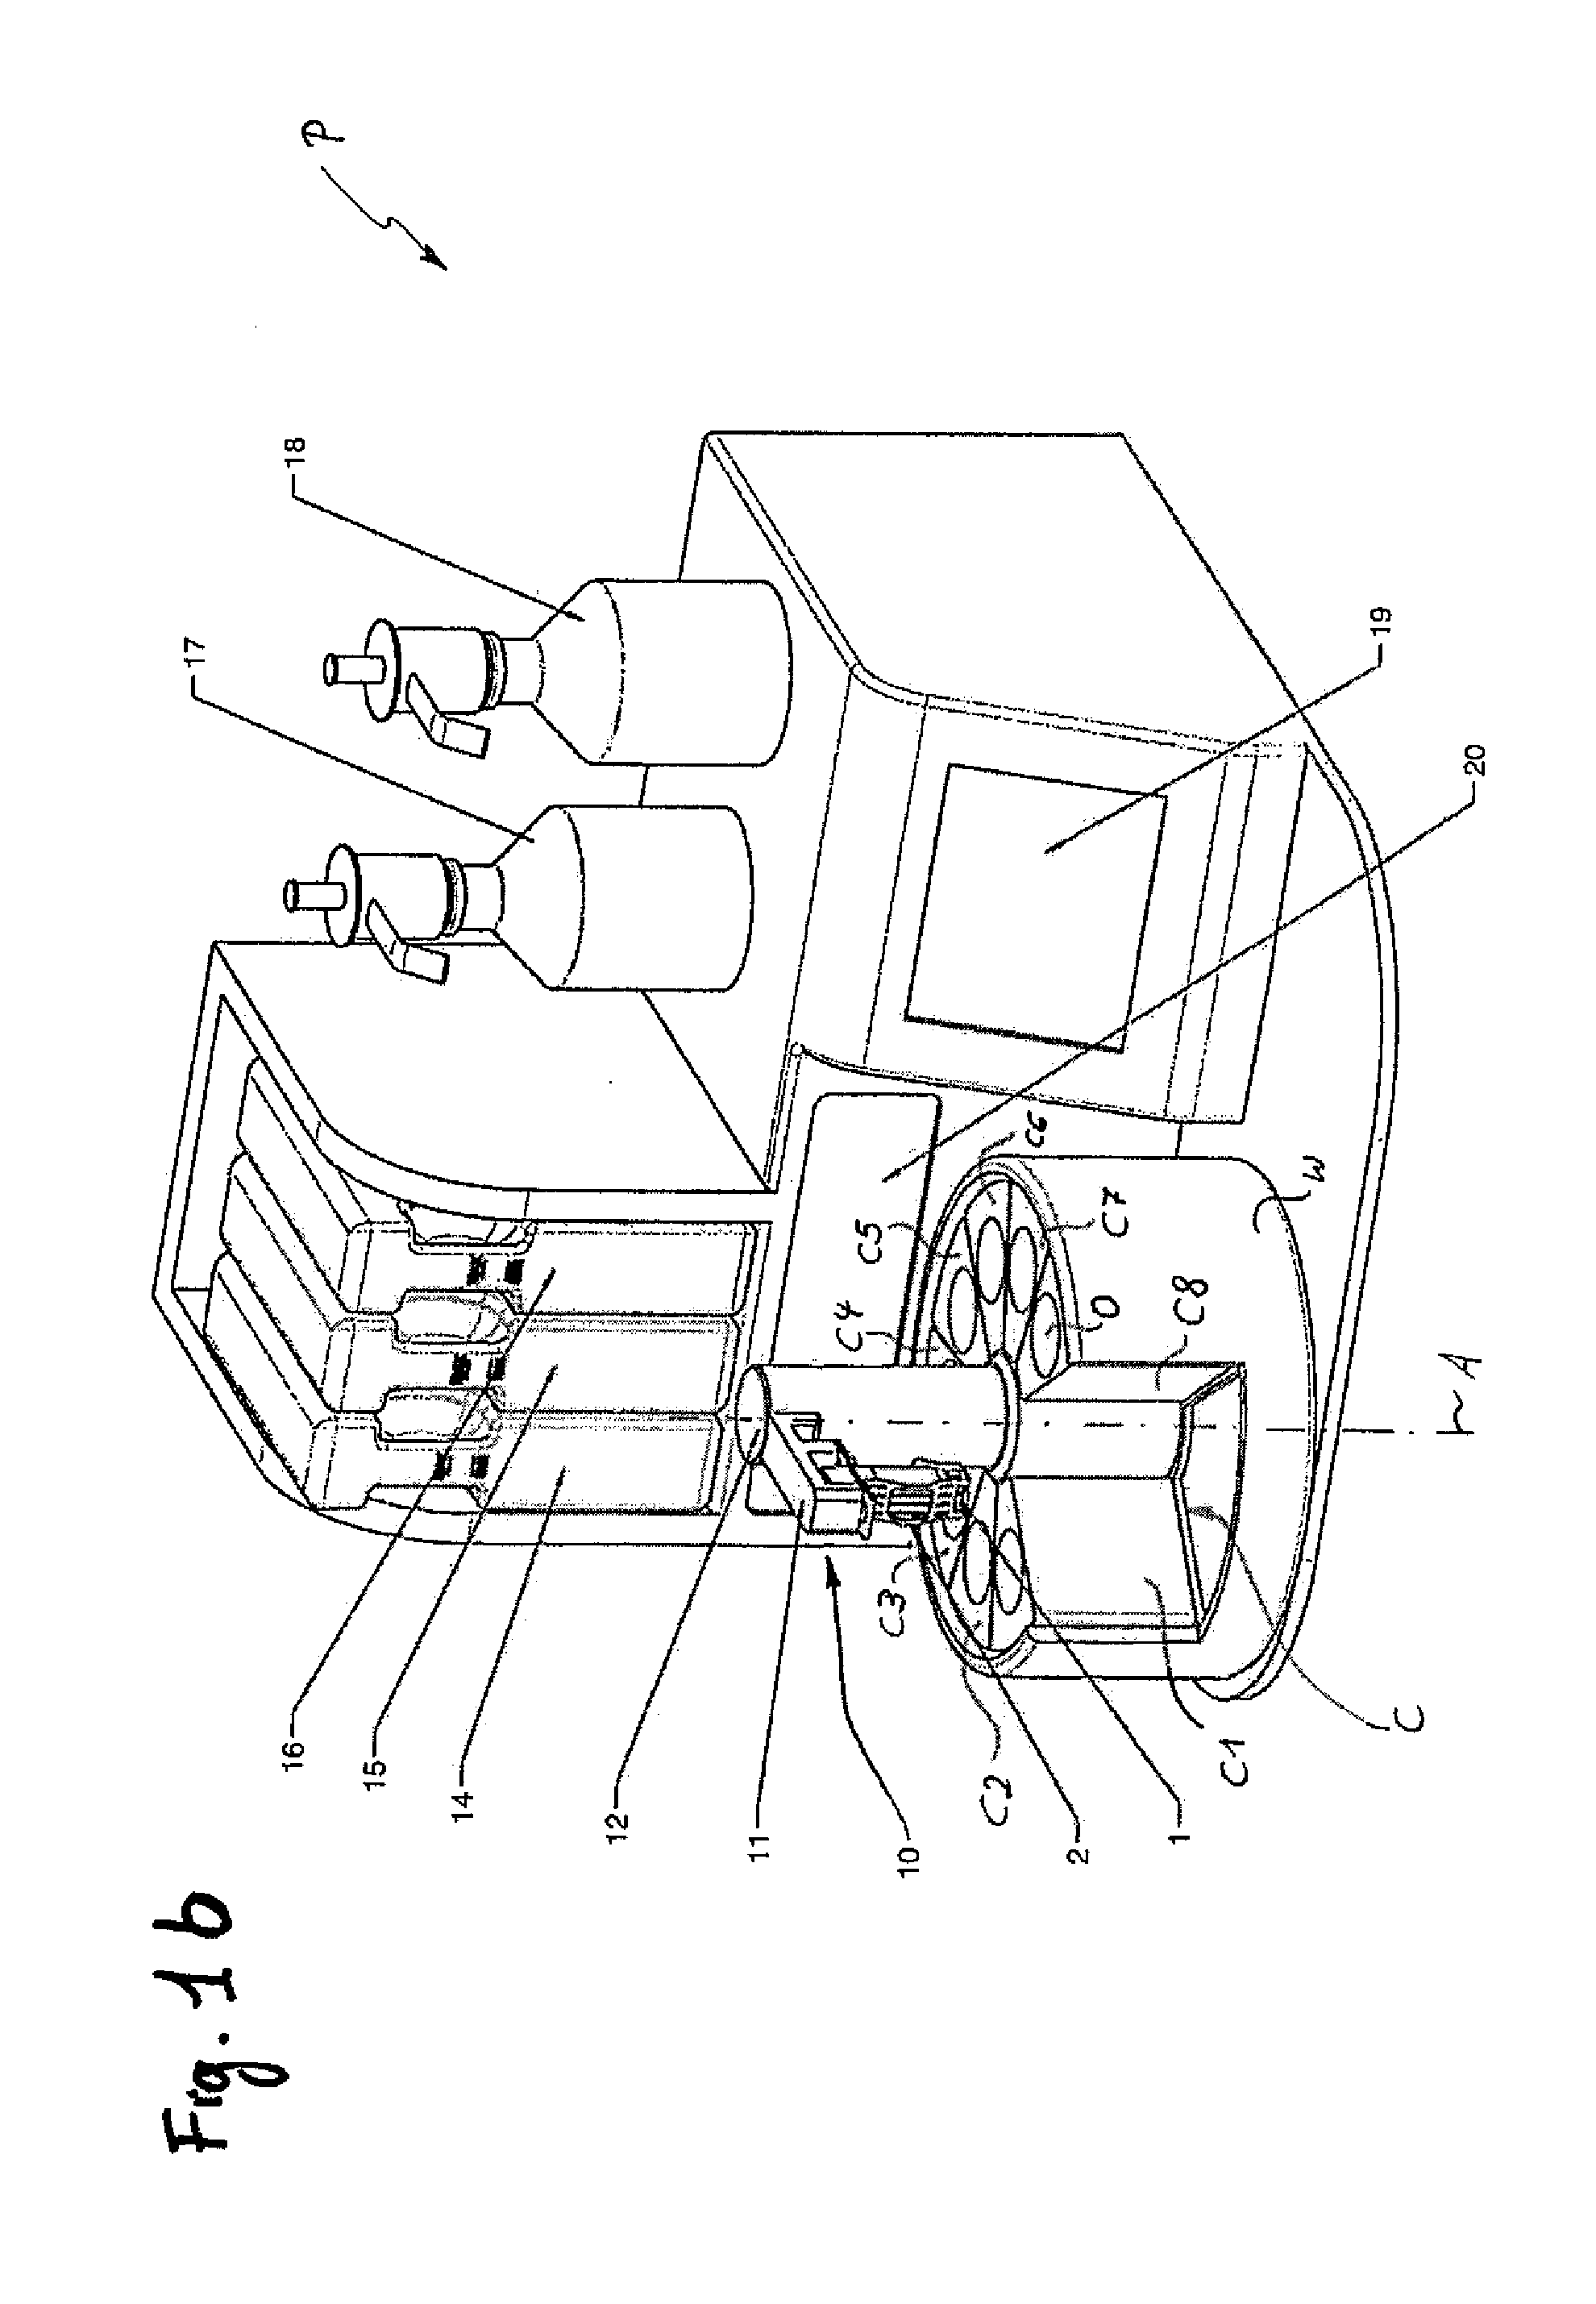 Method, Processor and Carrier for Processing Frozen Slices of Tissue of Biospecimens